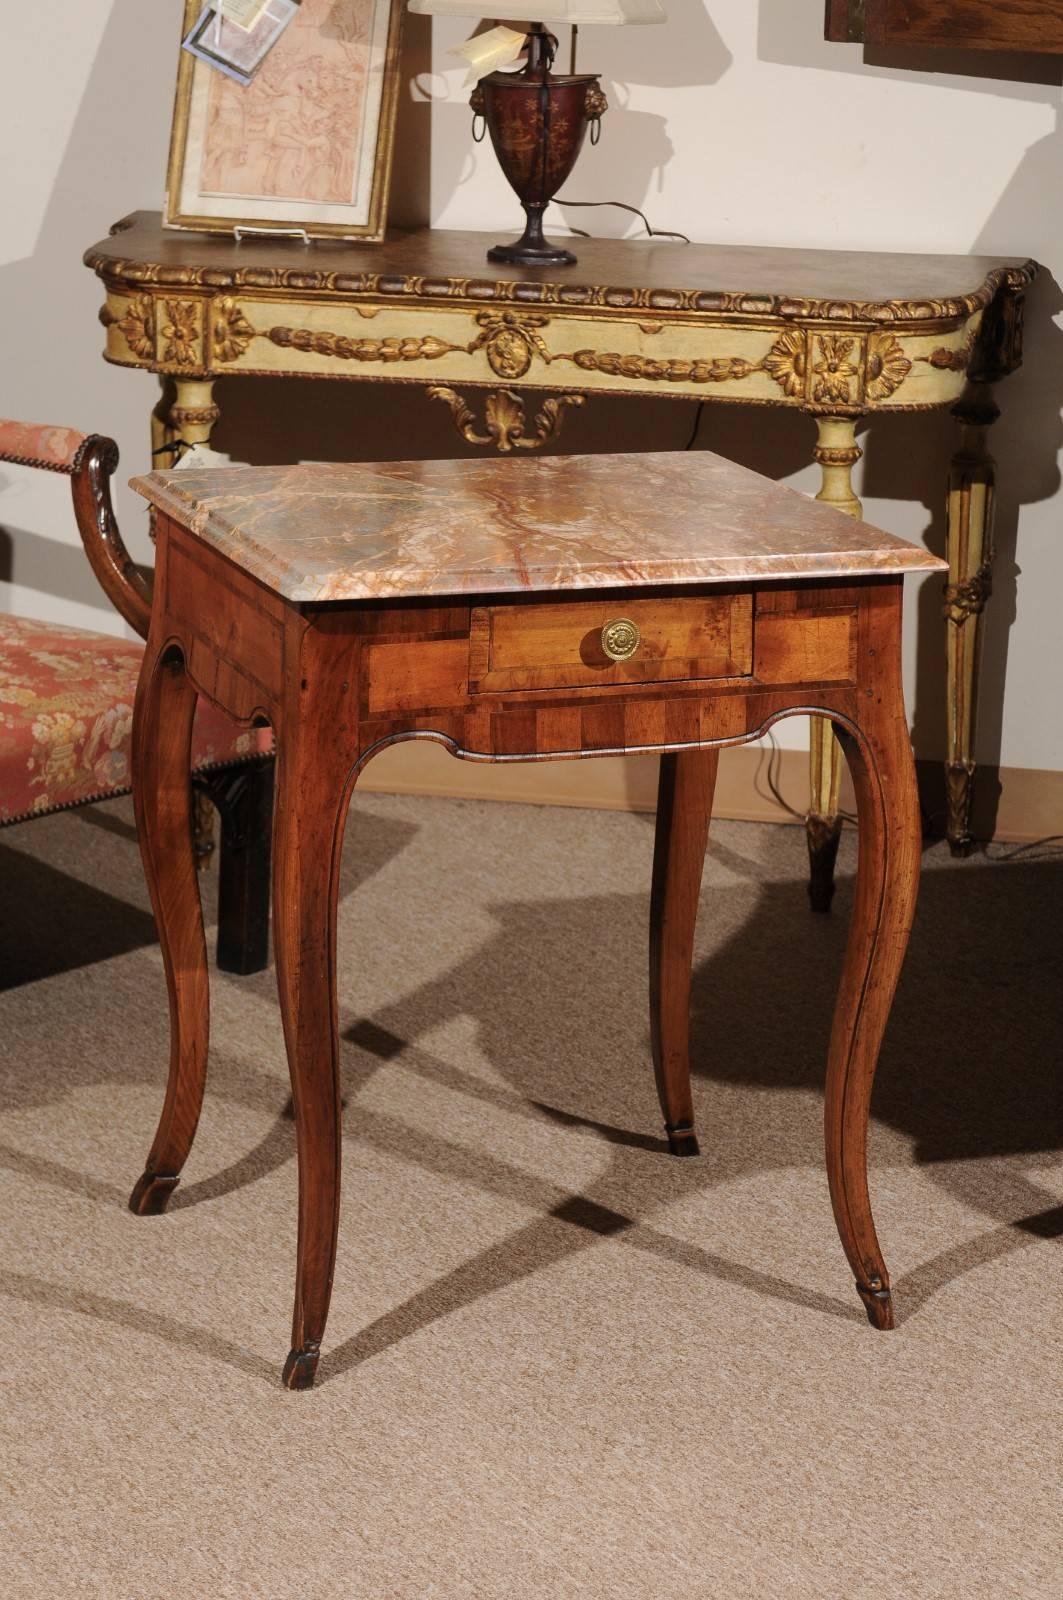 The Rococo walnut inlaid table with marble top in grey and salmon hues resting on walnut base in Rococo form with drawer, cabriole legs and hoofed feet. 


 